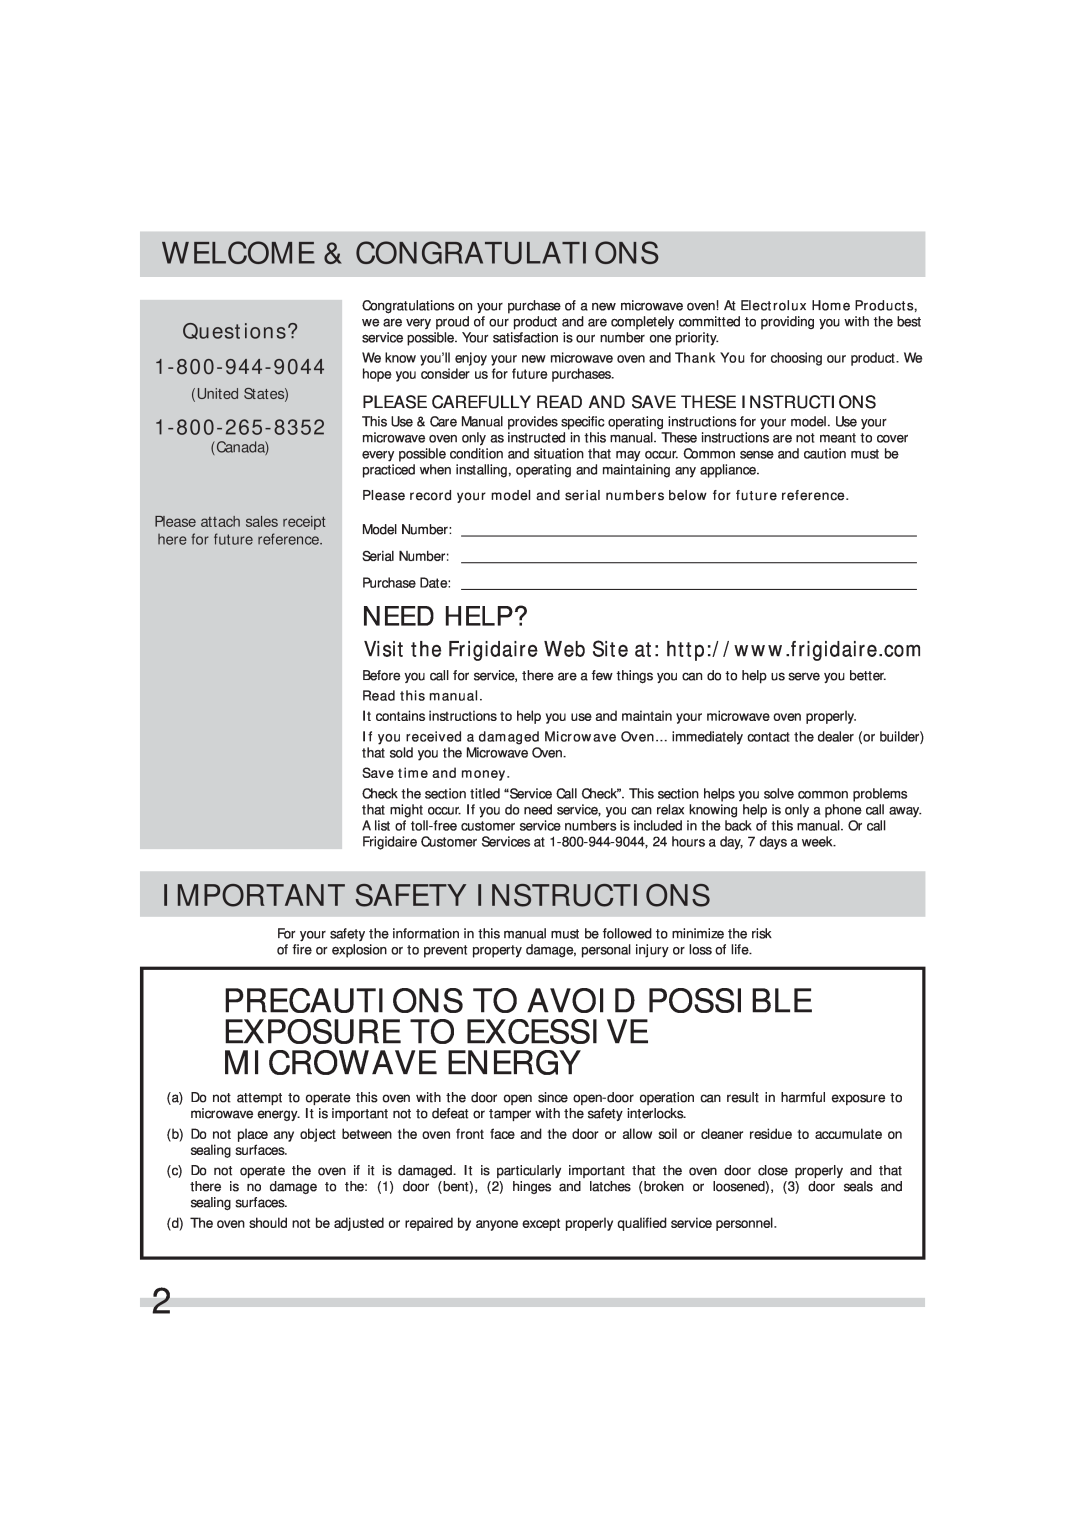 Frigidaire FFMV162LS, FFMV162LW Welcome & Congratulations, Important Safety Instructions, Need Help?, Read this manual 